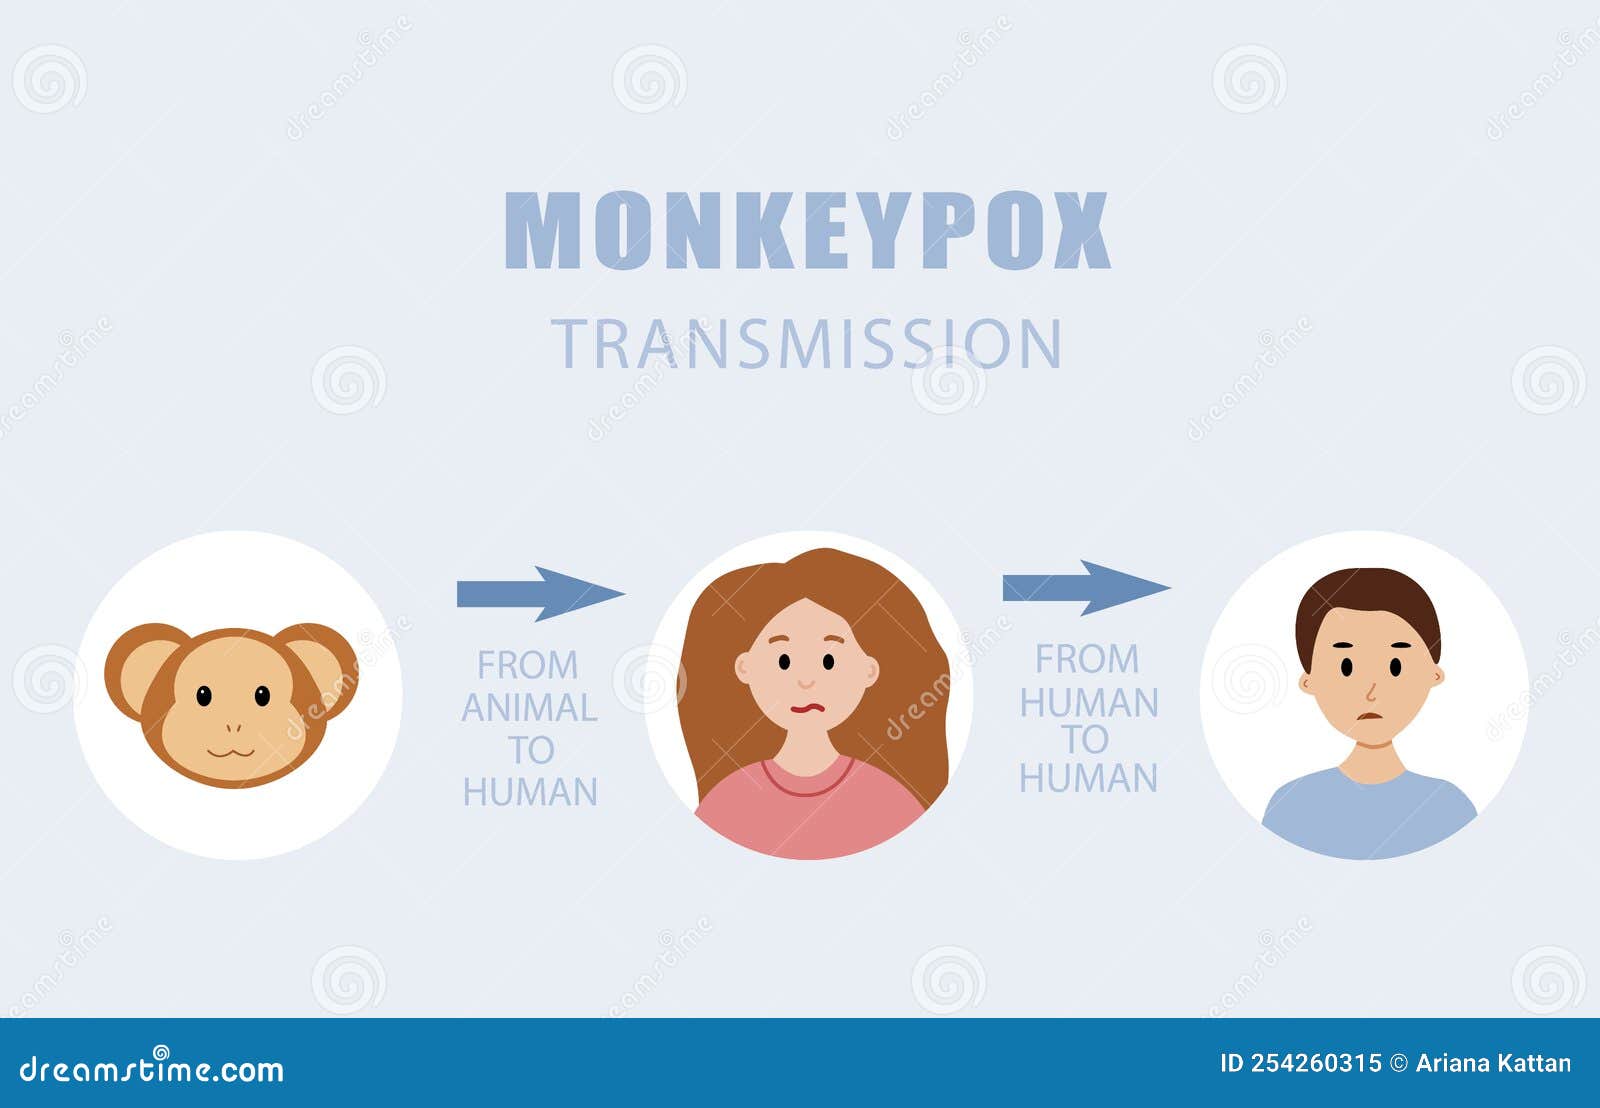 monkeypox transmission explanation with infographics. spreading of virus from animal.